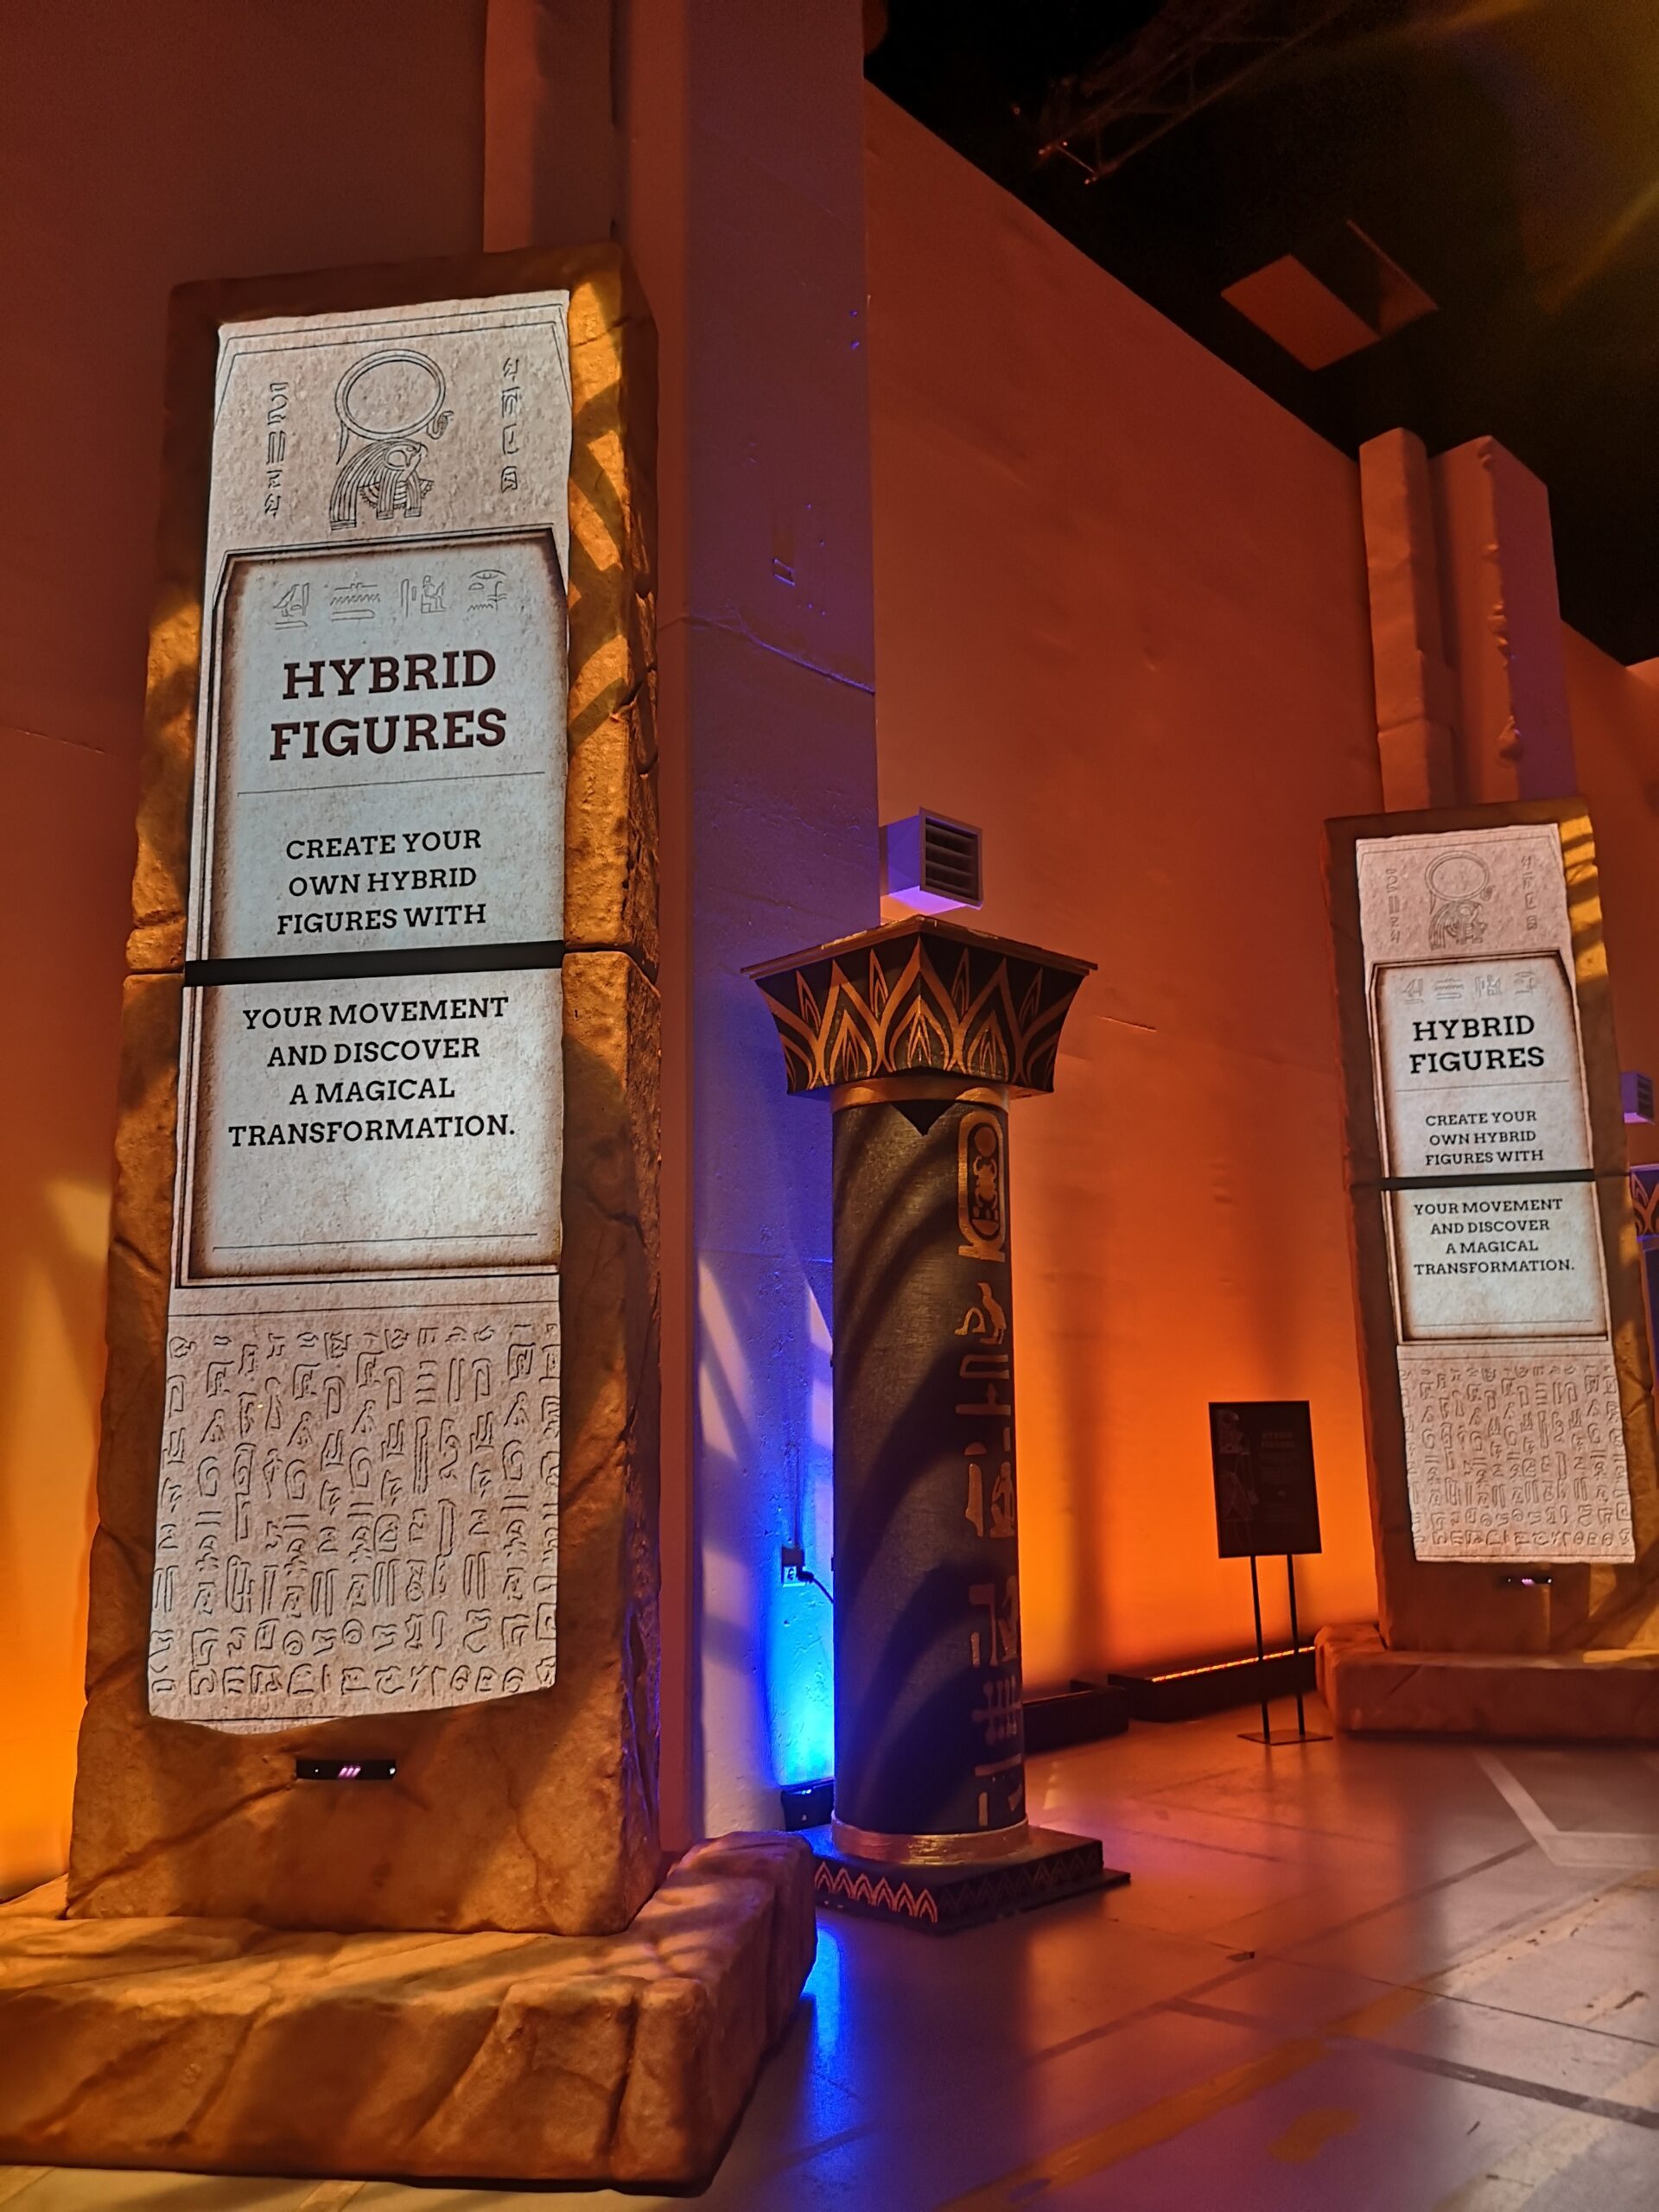 Image from the interactive game of Immersive Tut at the entry. It consists of a pillar with a screen in the middle where you can play the game.